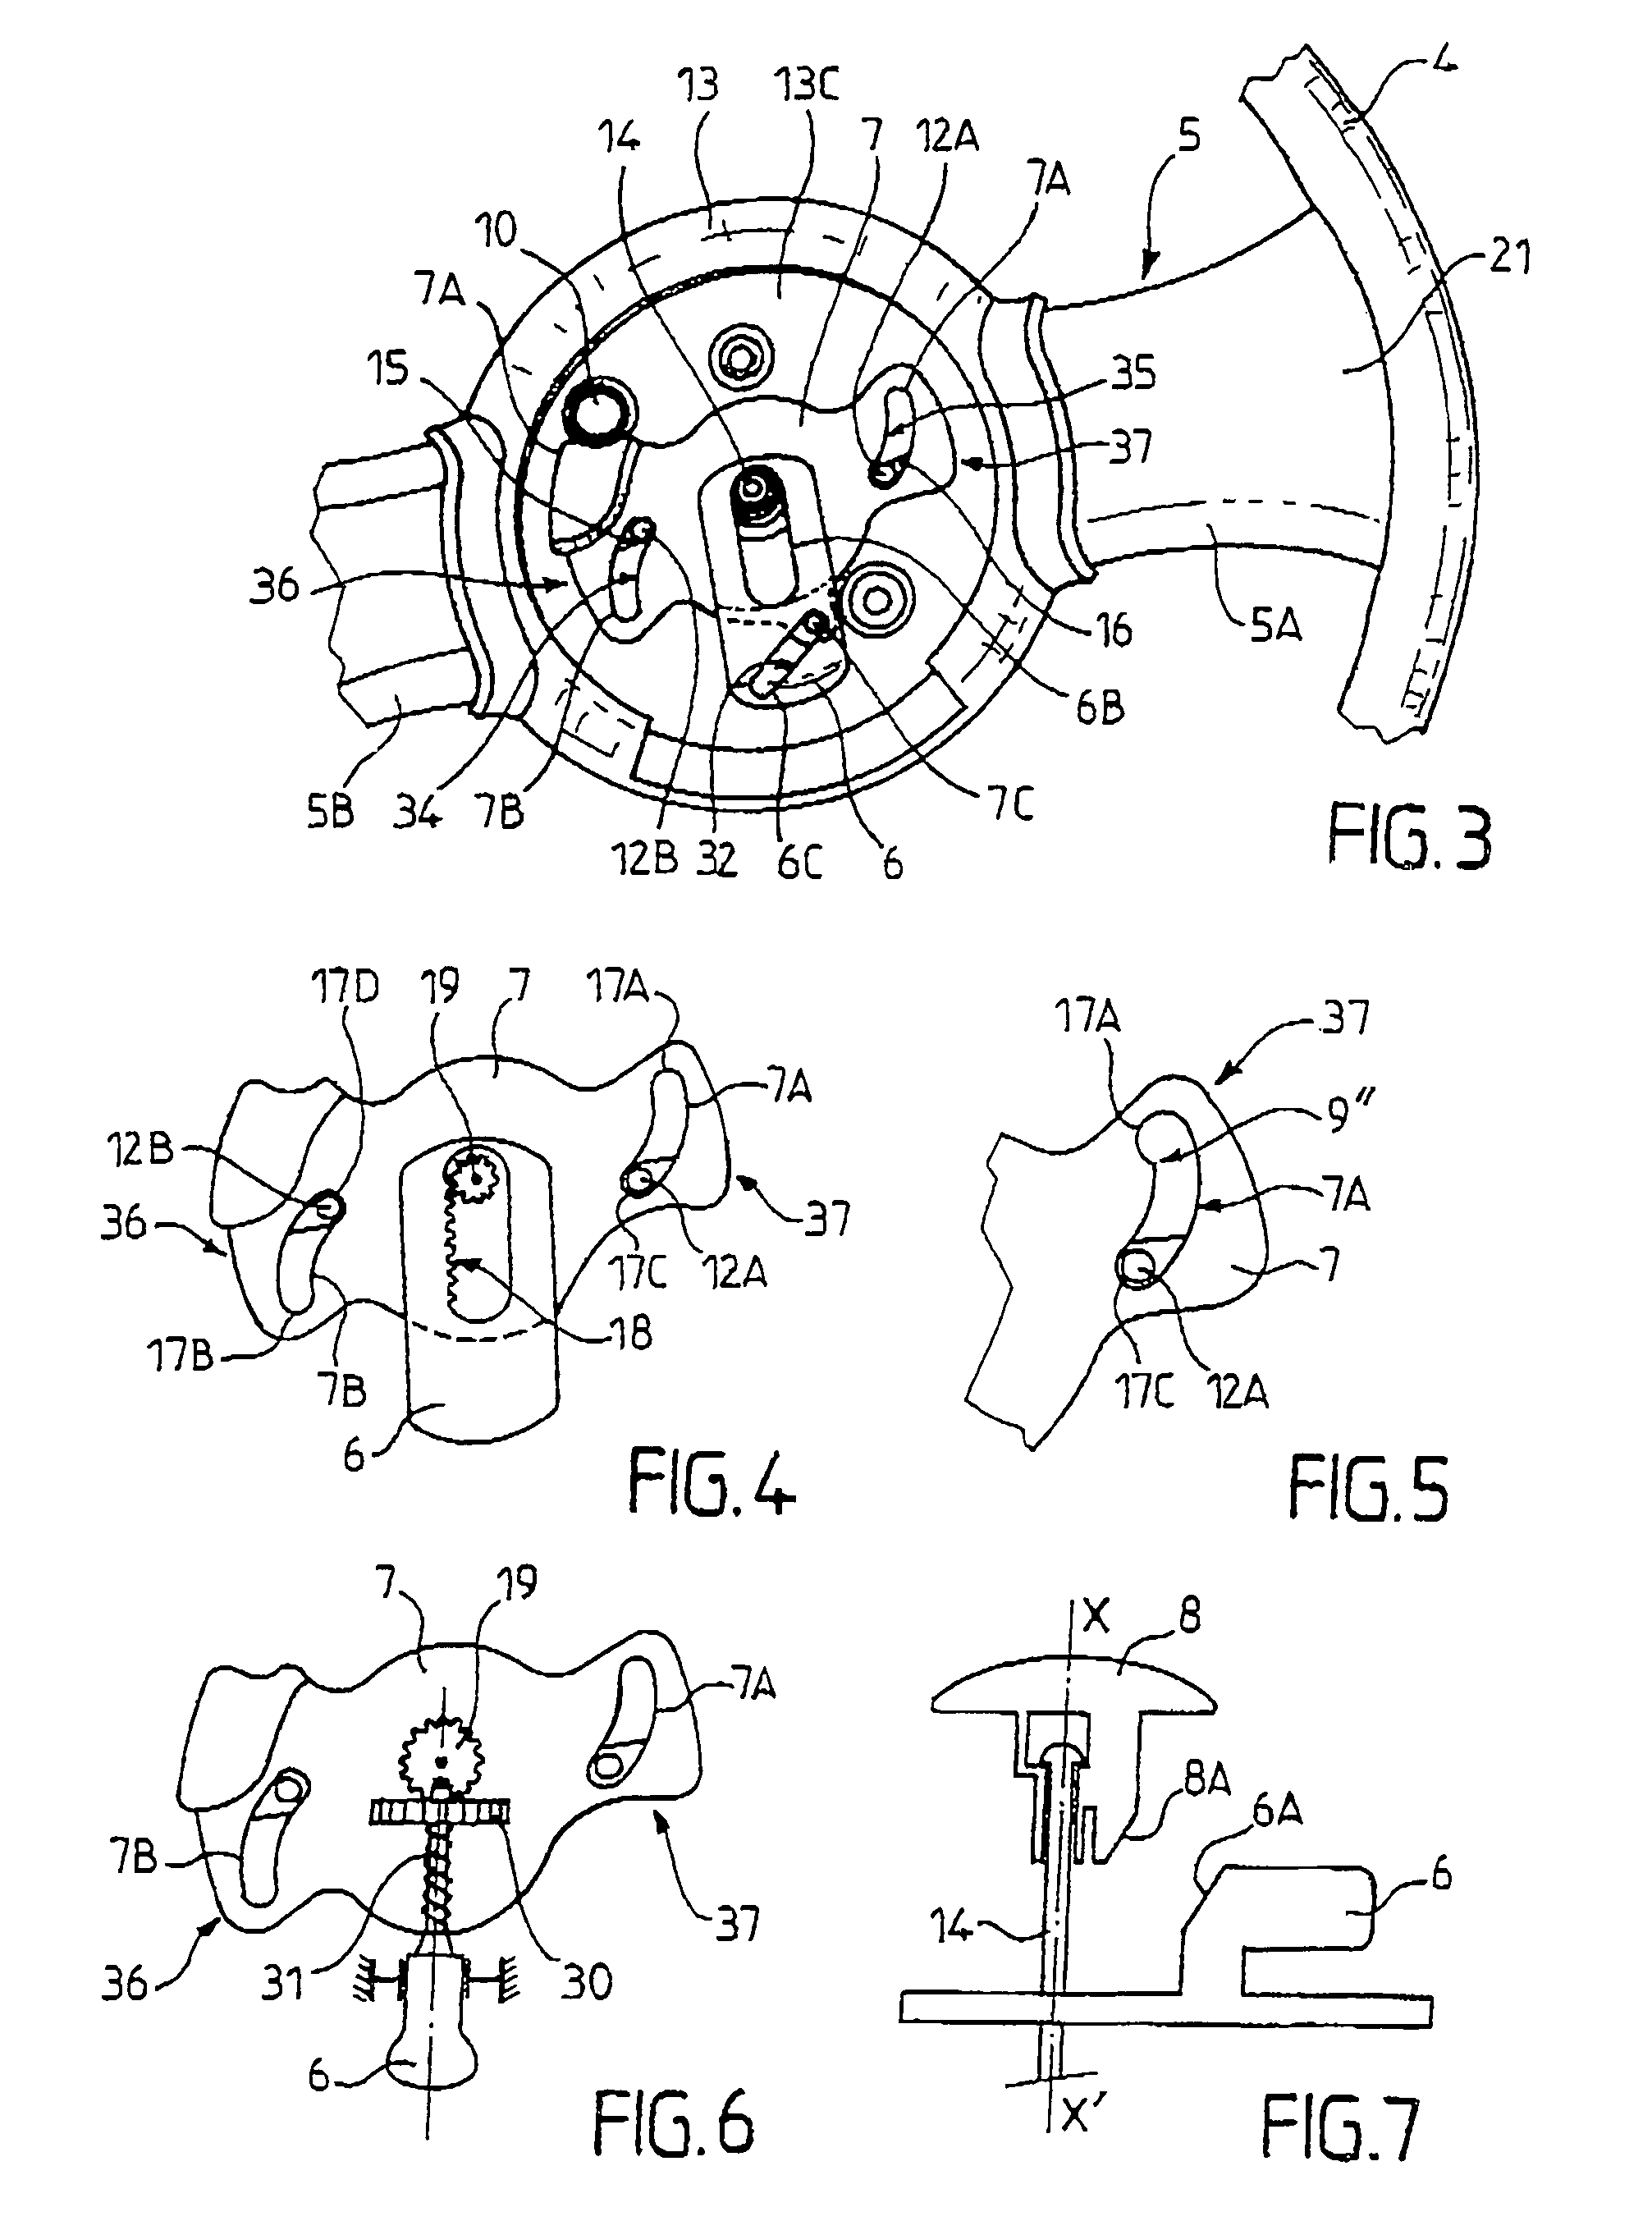 Food pressure-cooking device with a rotary locking/unlocking control device